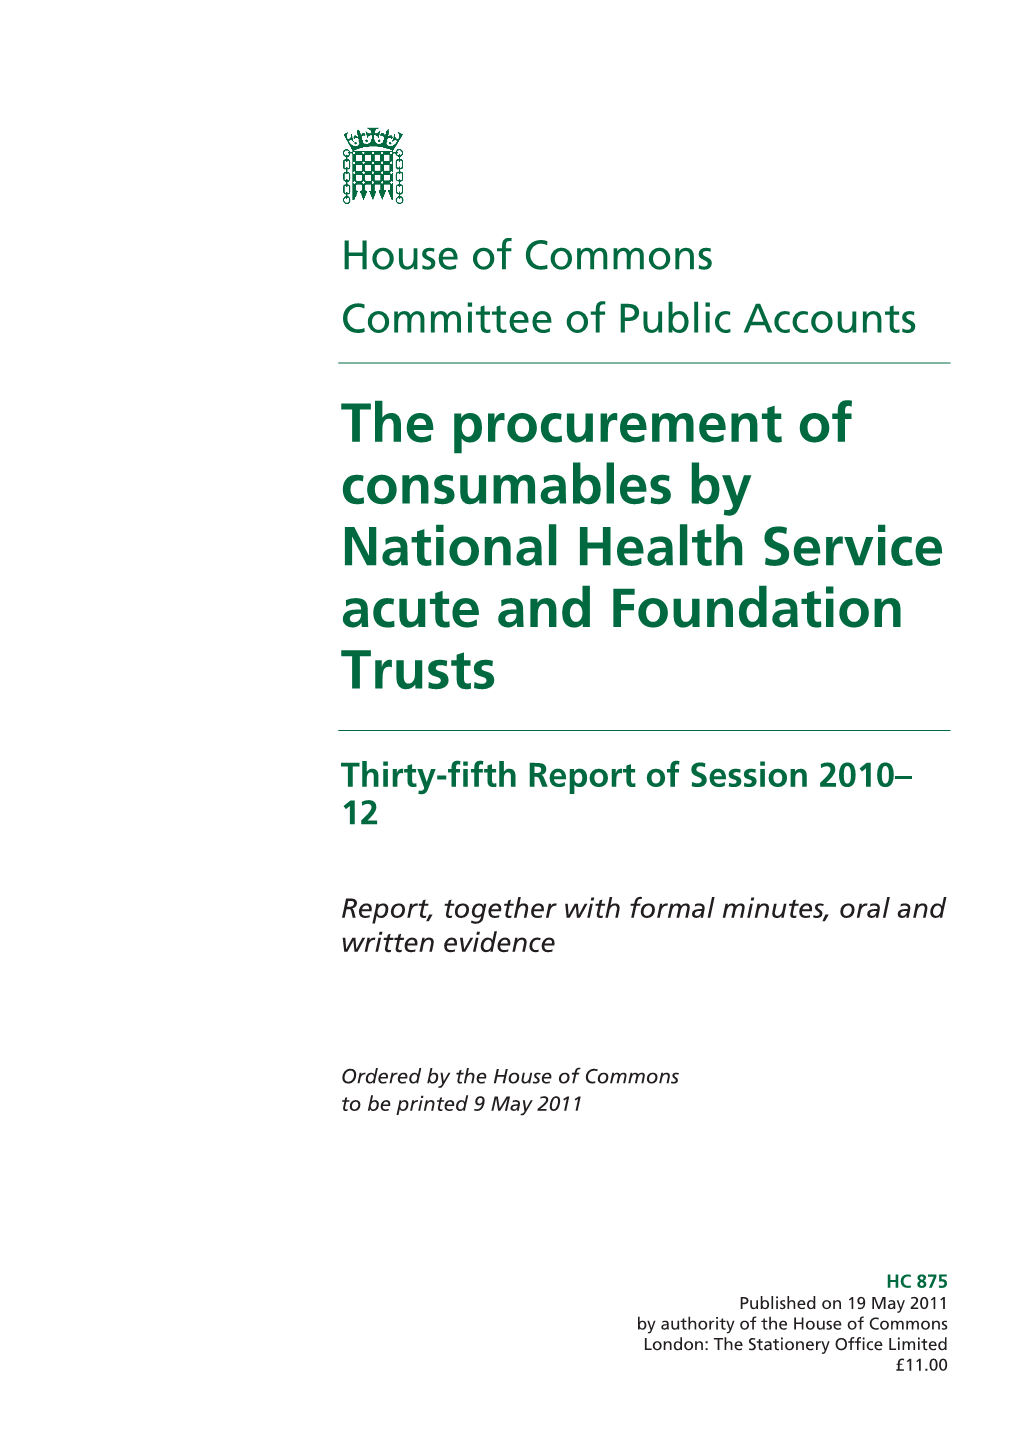 The Procurement of Consumables by National Health Service Acute and Foundation Trusts